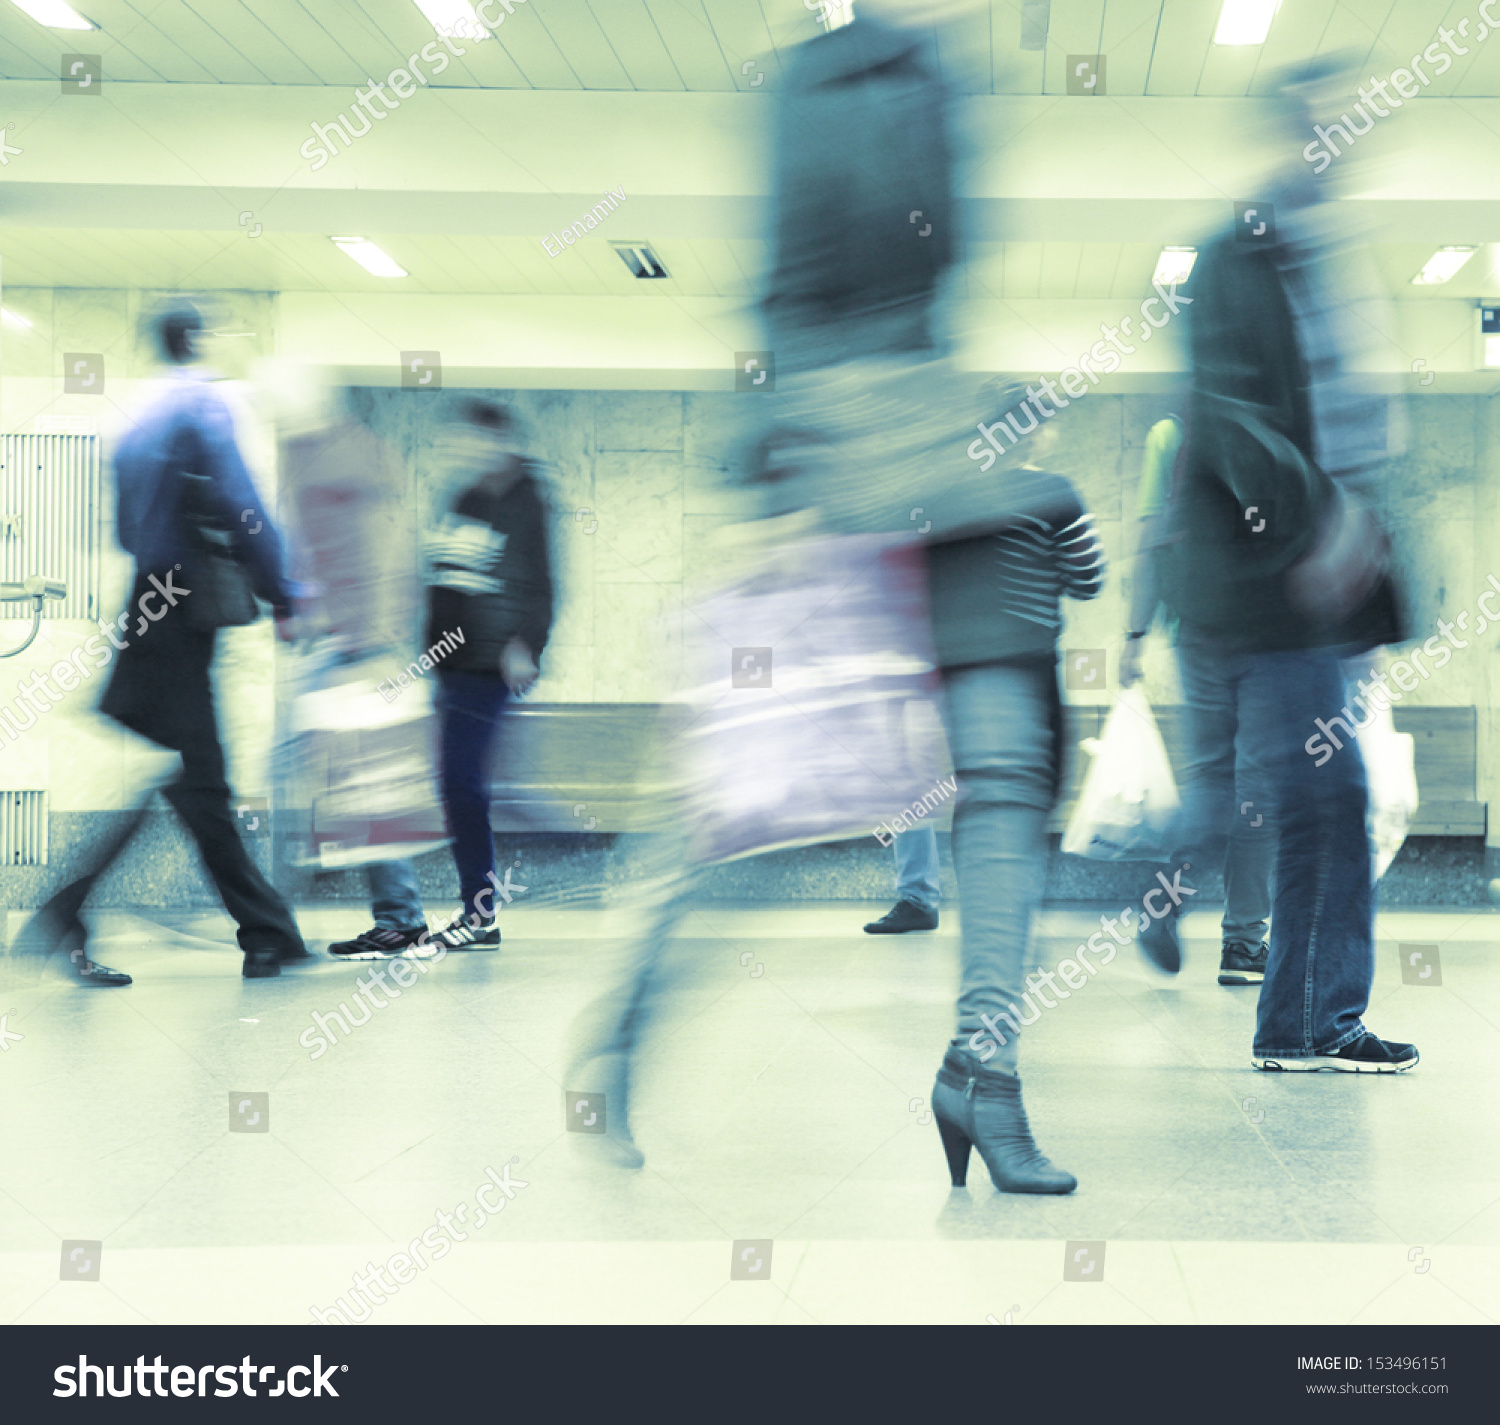 Motion blurred commuters walking in subway station. #153496151